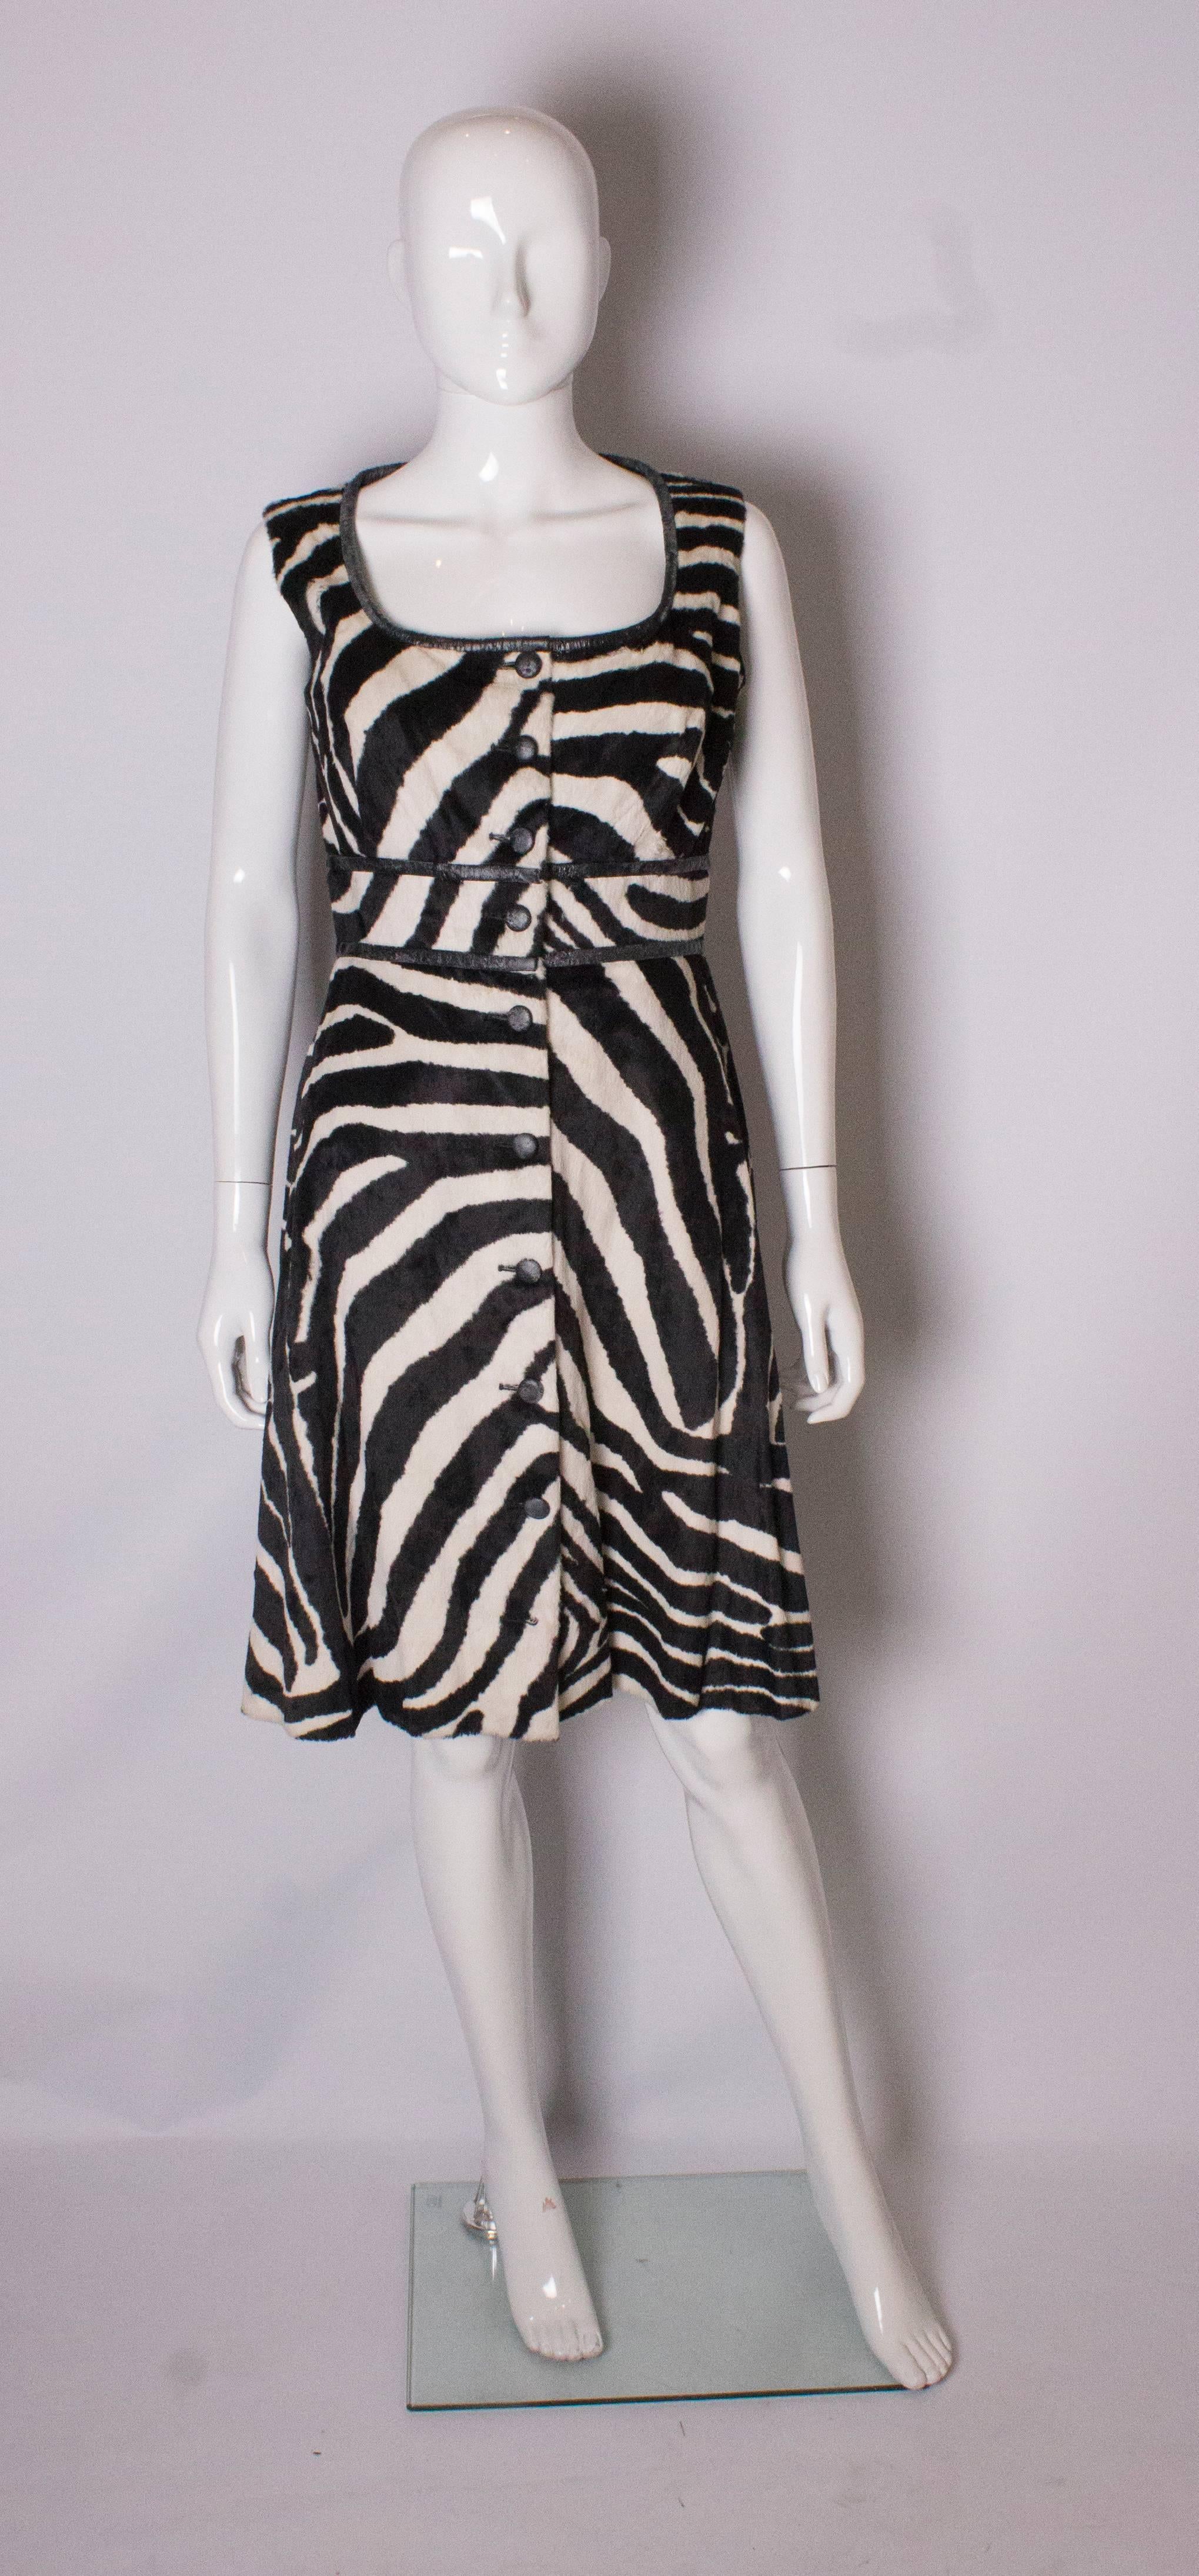 A fun vintage dress by Susan Small. In an animal print , the dress has a round neckline, is fully lined and has a button through front.